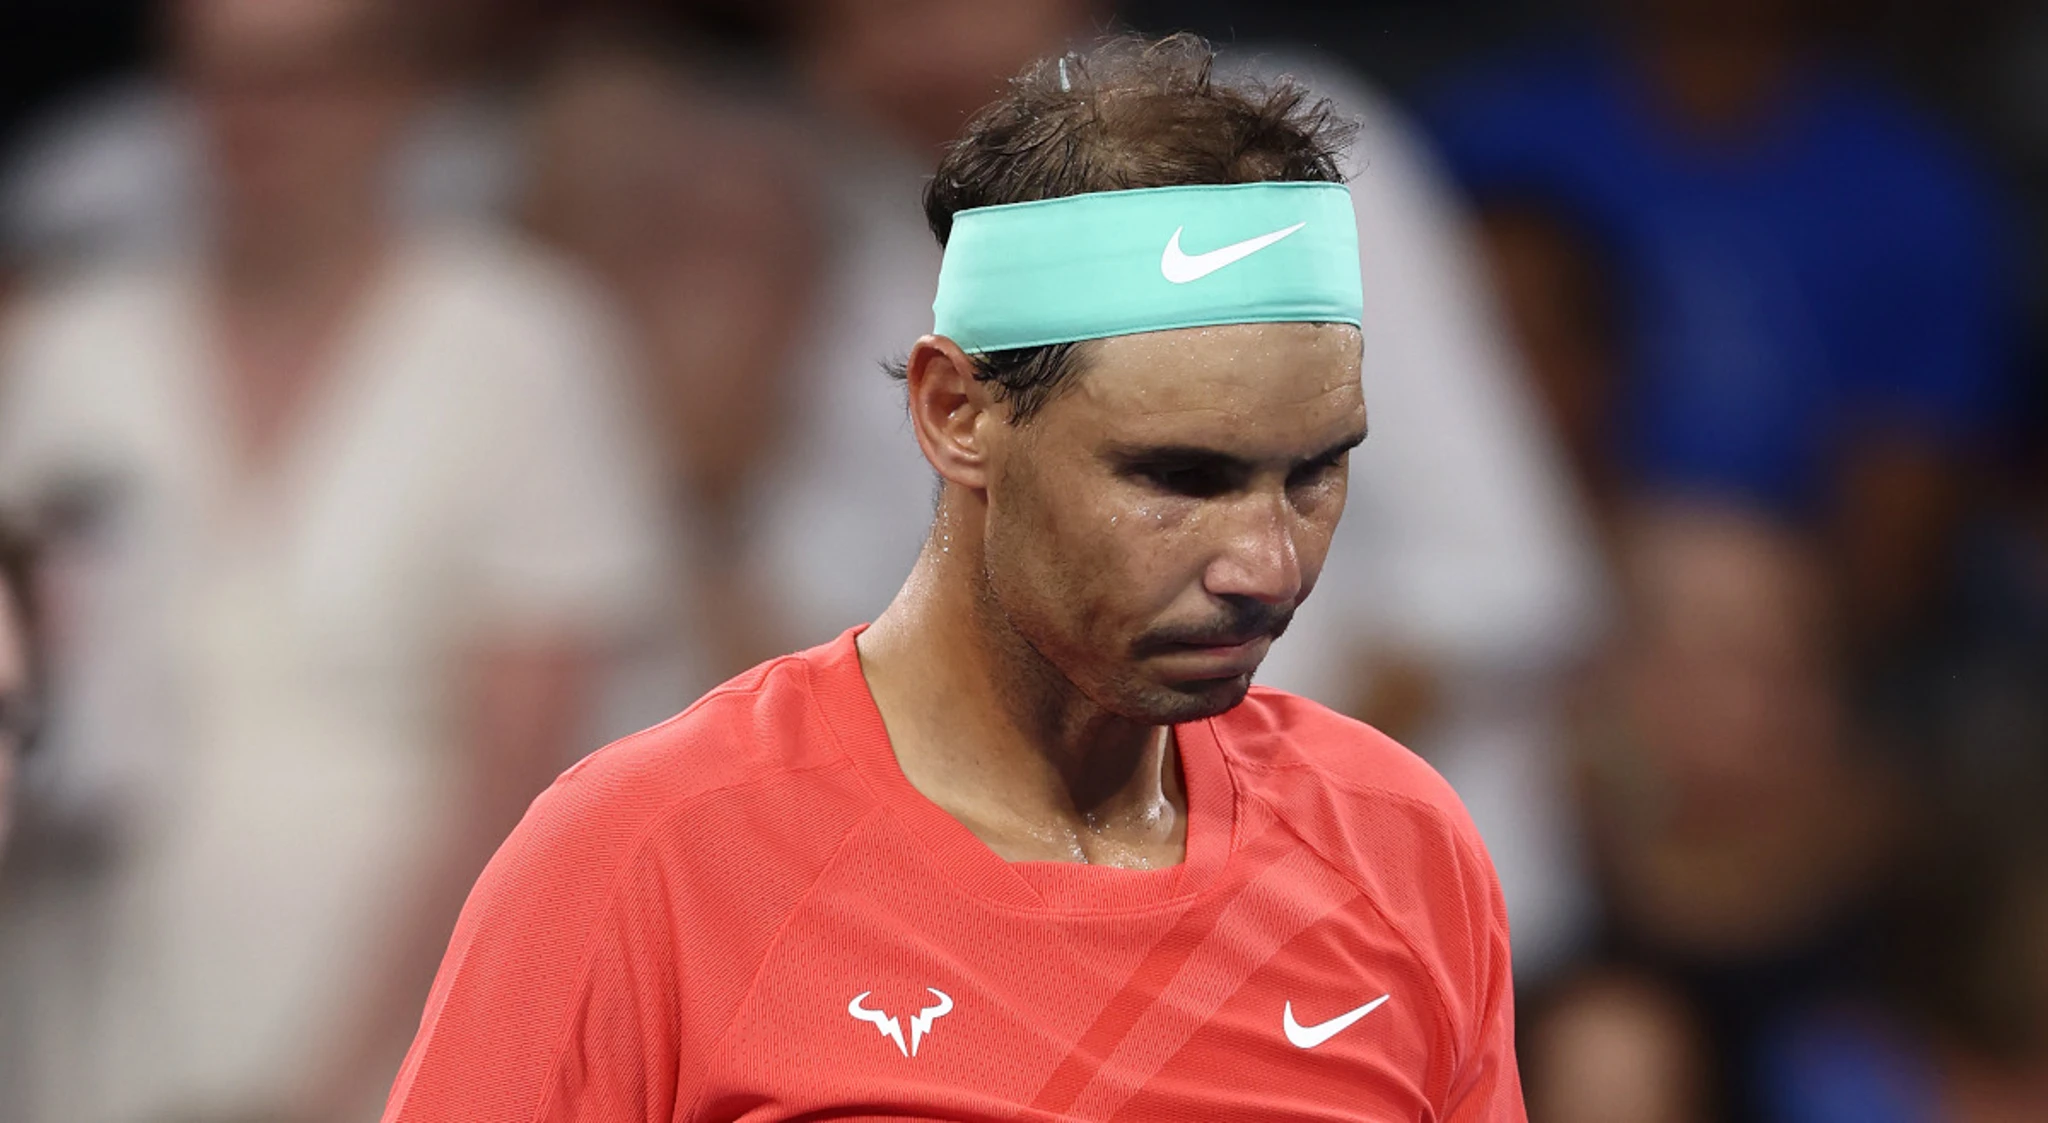 Rafa Nadal: The first goal is to try to compete, I'm going day by day